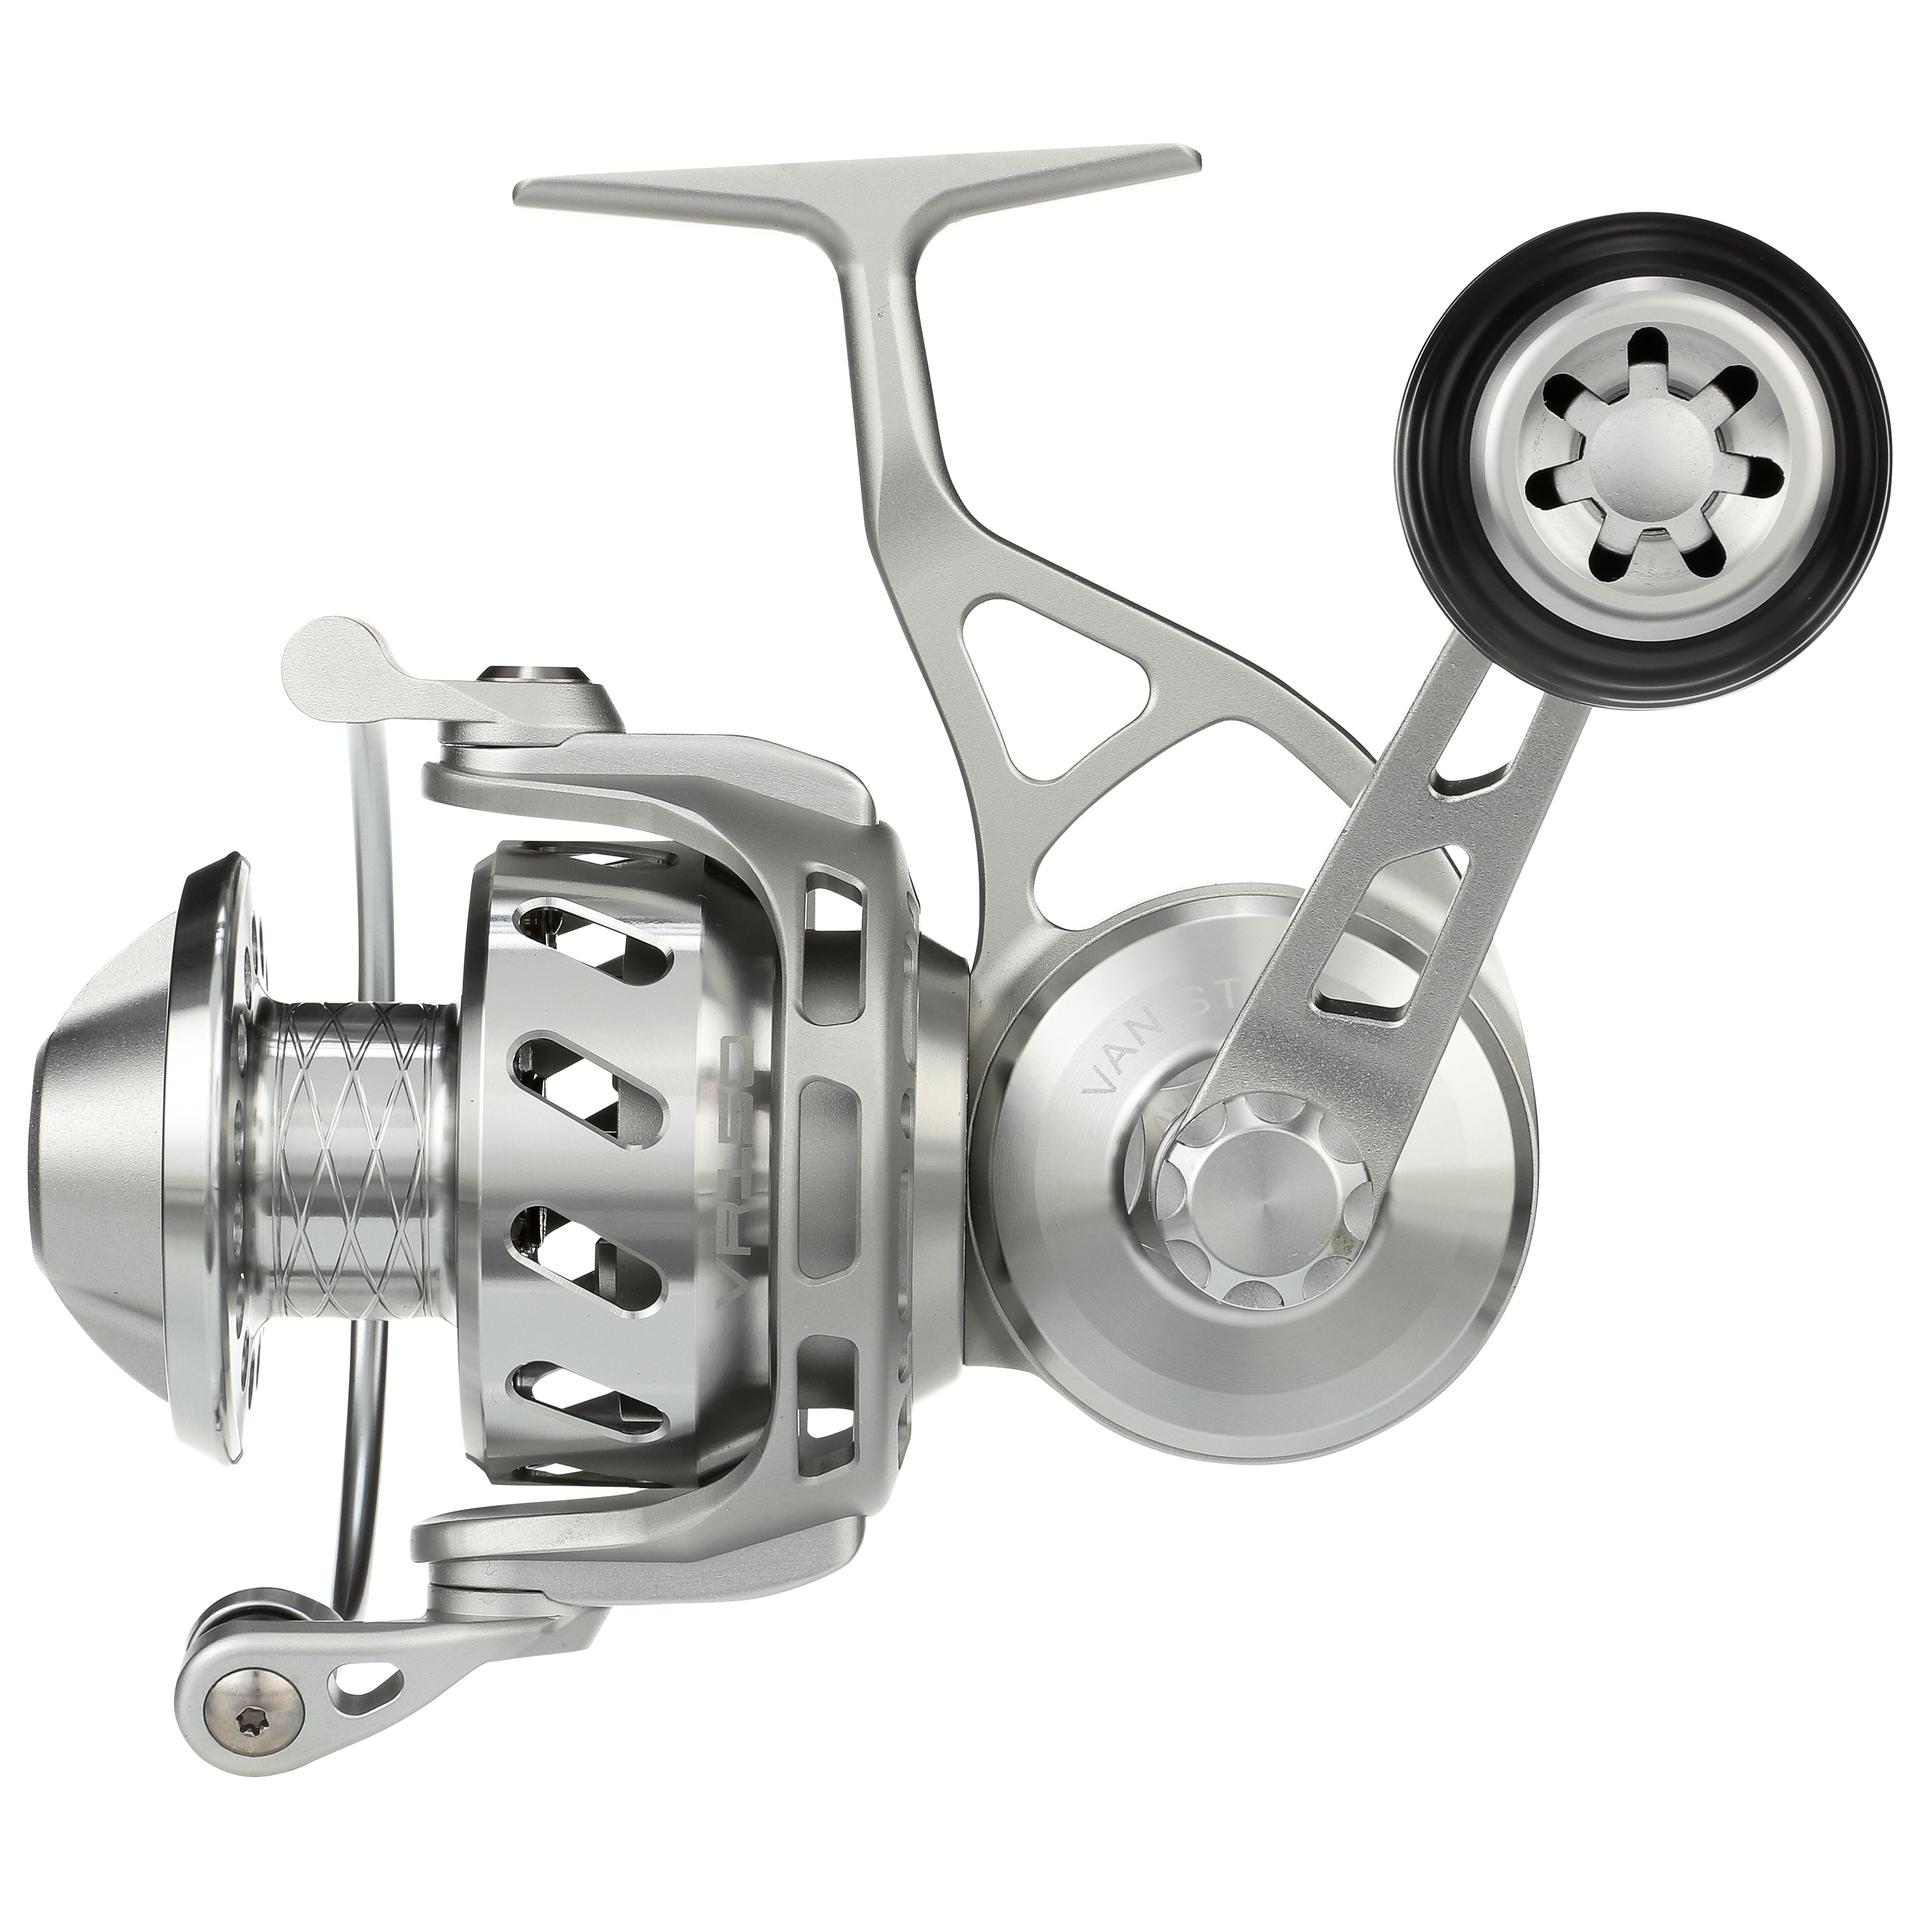 Trying out the Van Staal VR75 spinning reel #shorts #fishing